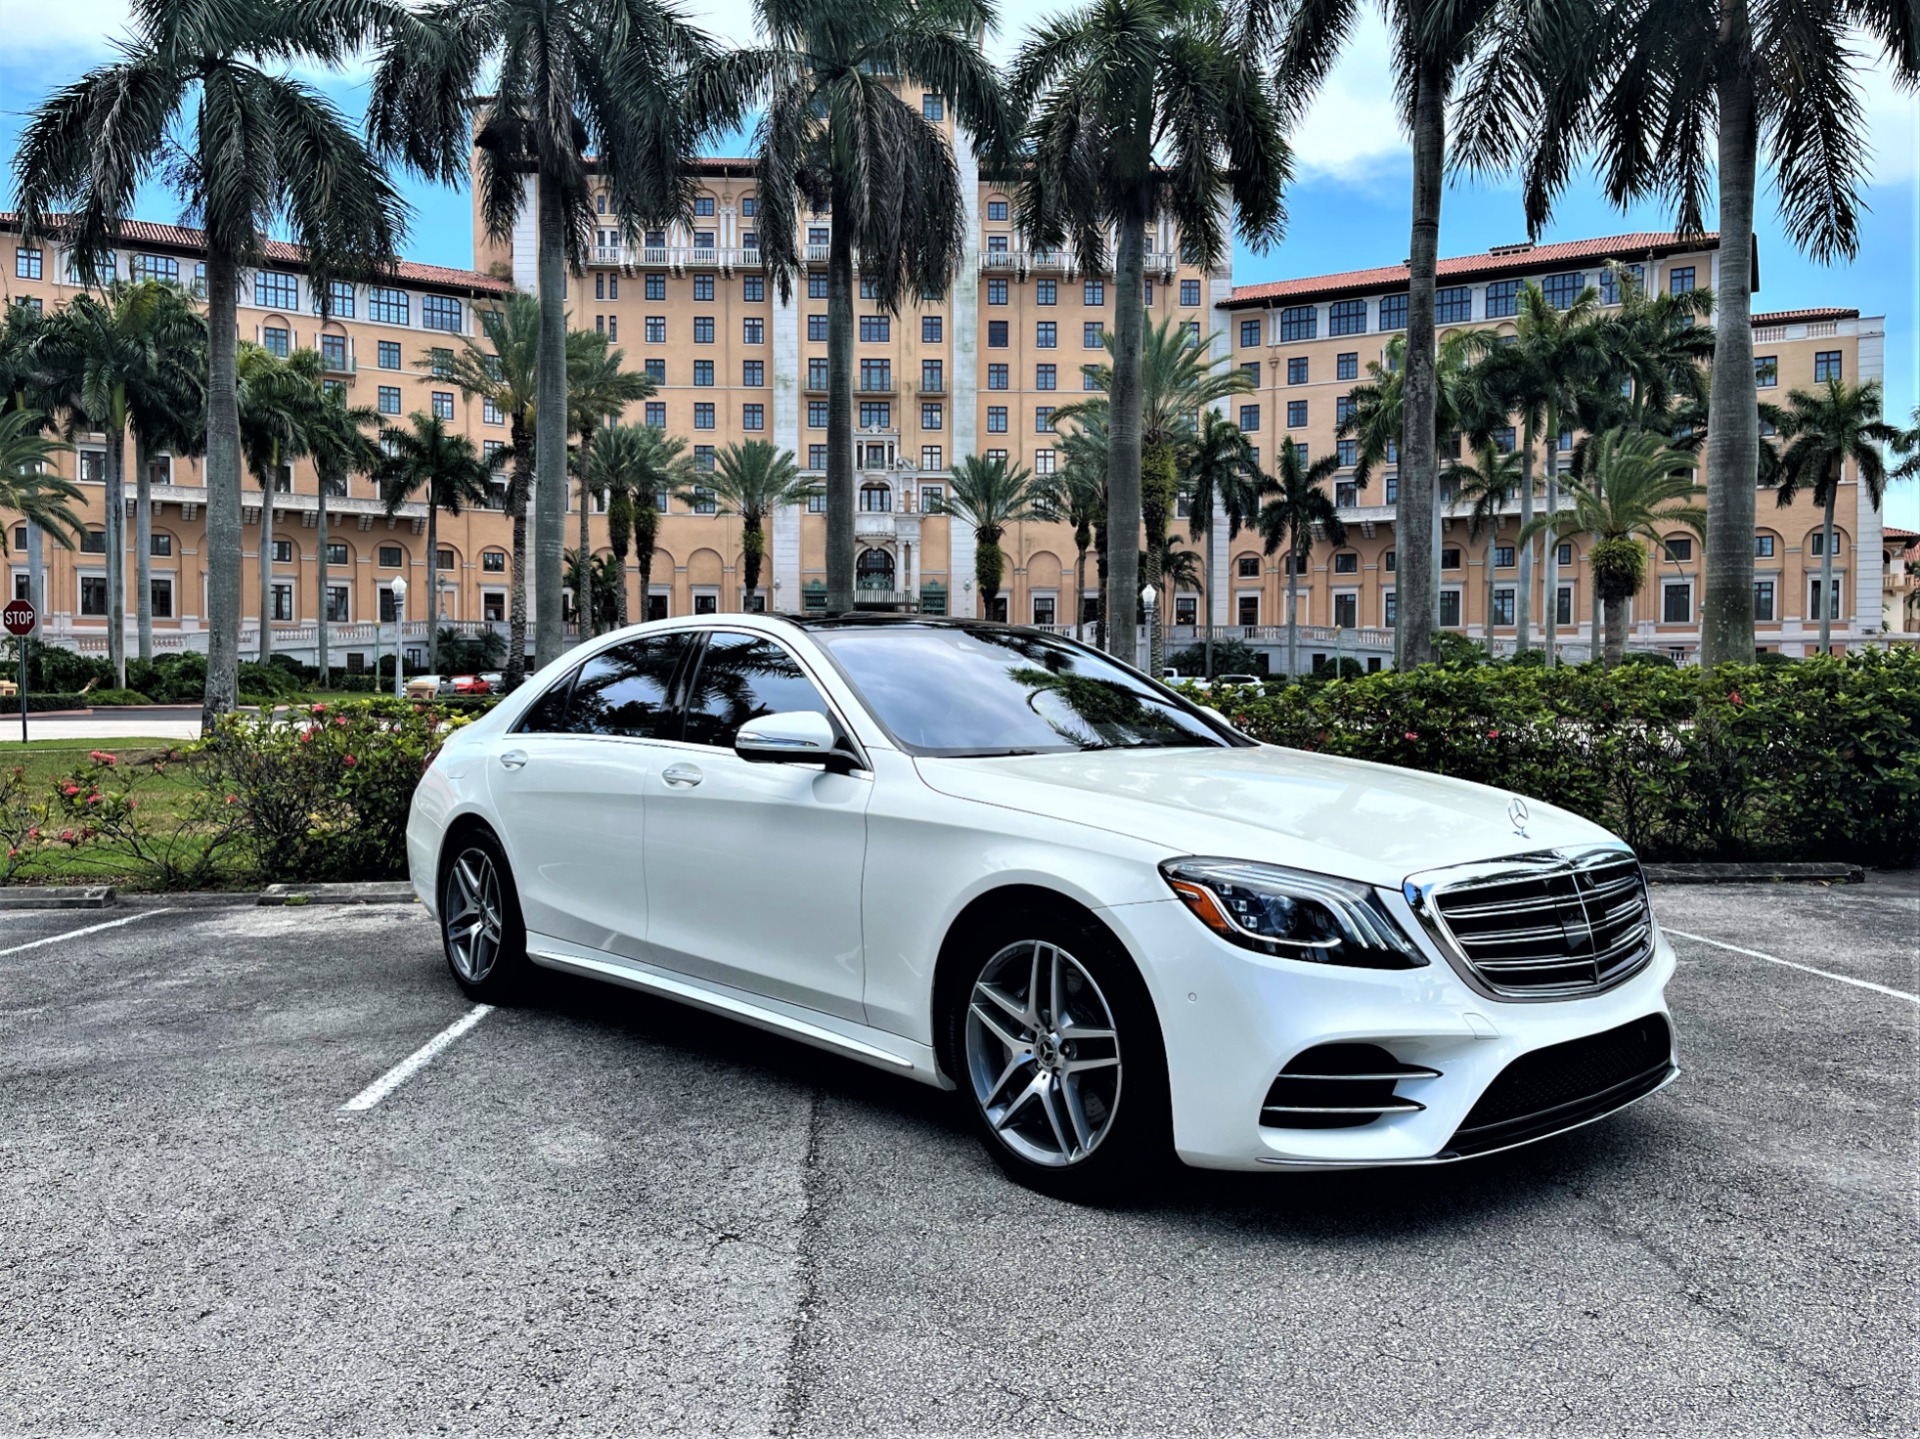 Used 2019 Mercedes-Benz S-Class S 560 4MATIC for sale $76,499 at The Gables Sports Cars in Miami FL 33146 2